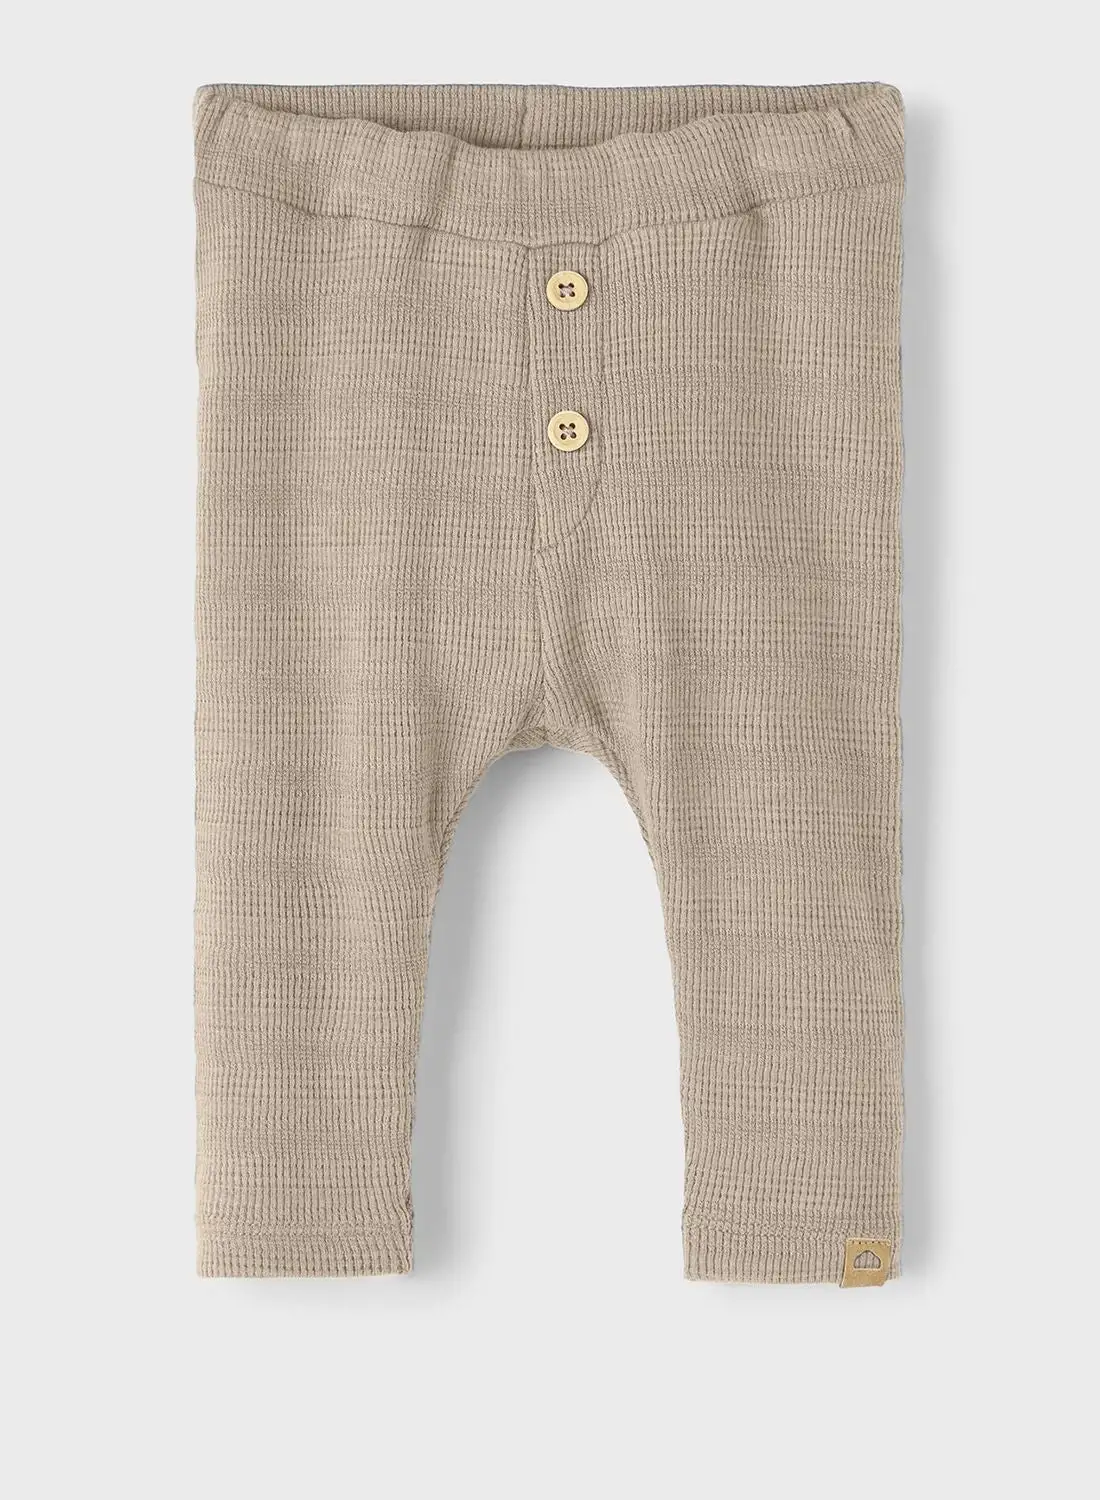 NAME IT Kids Knitted Trousers